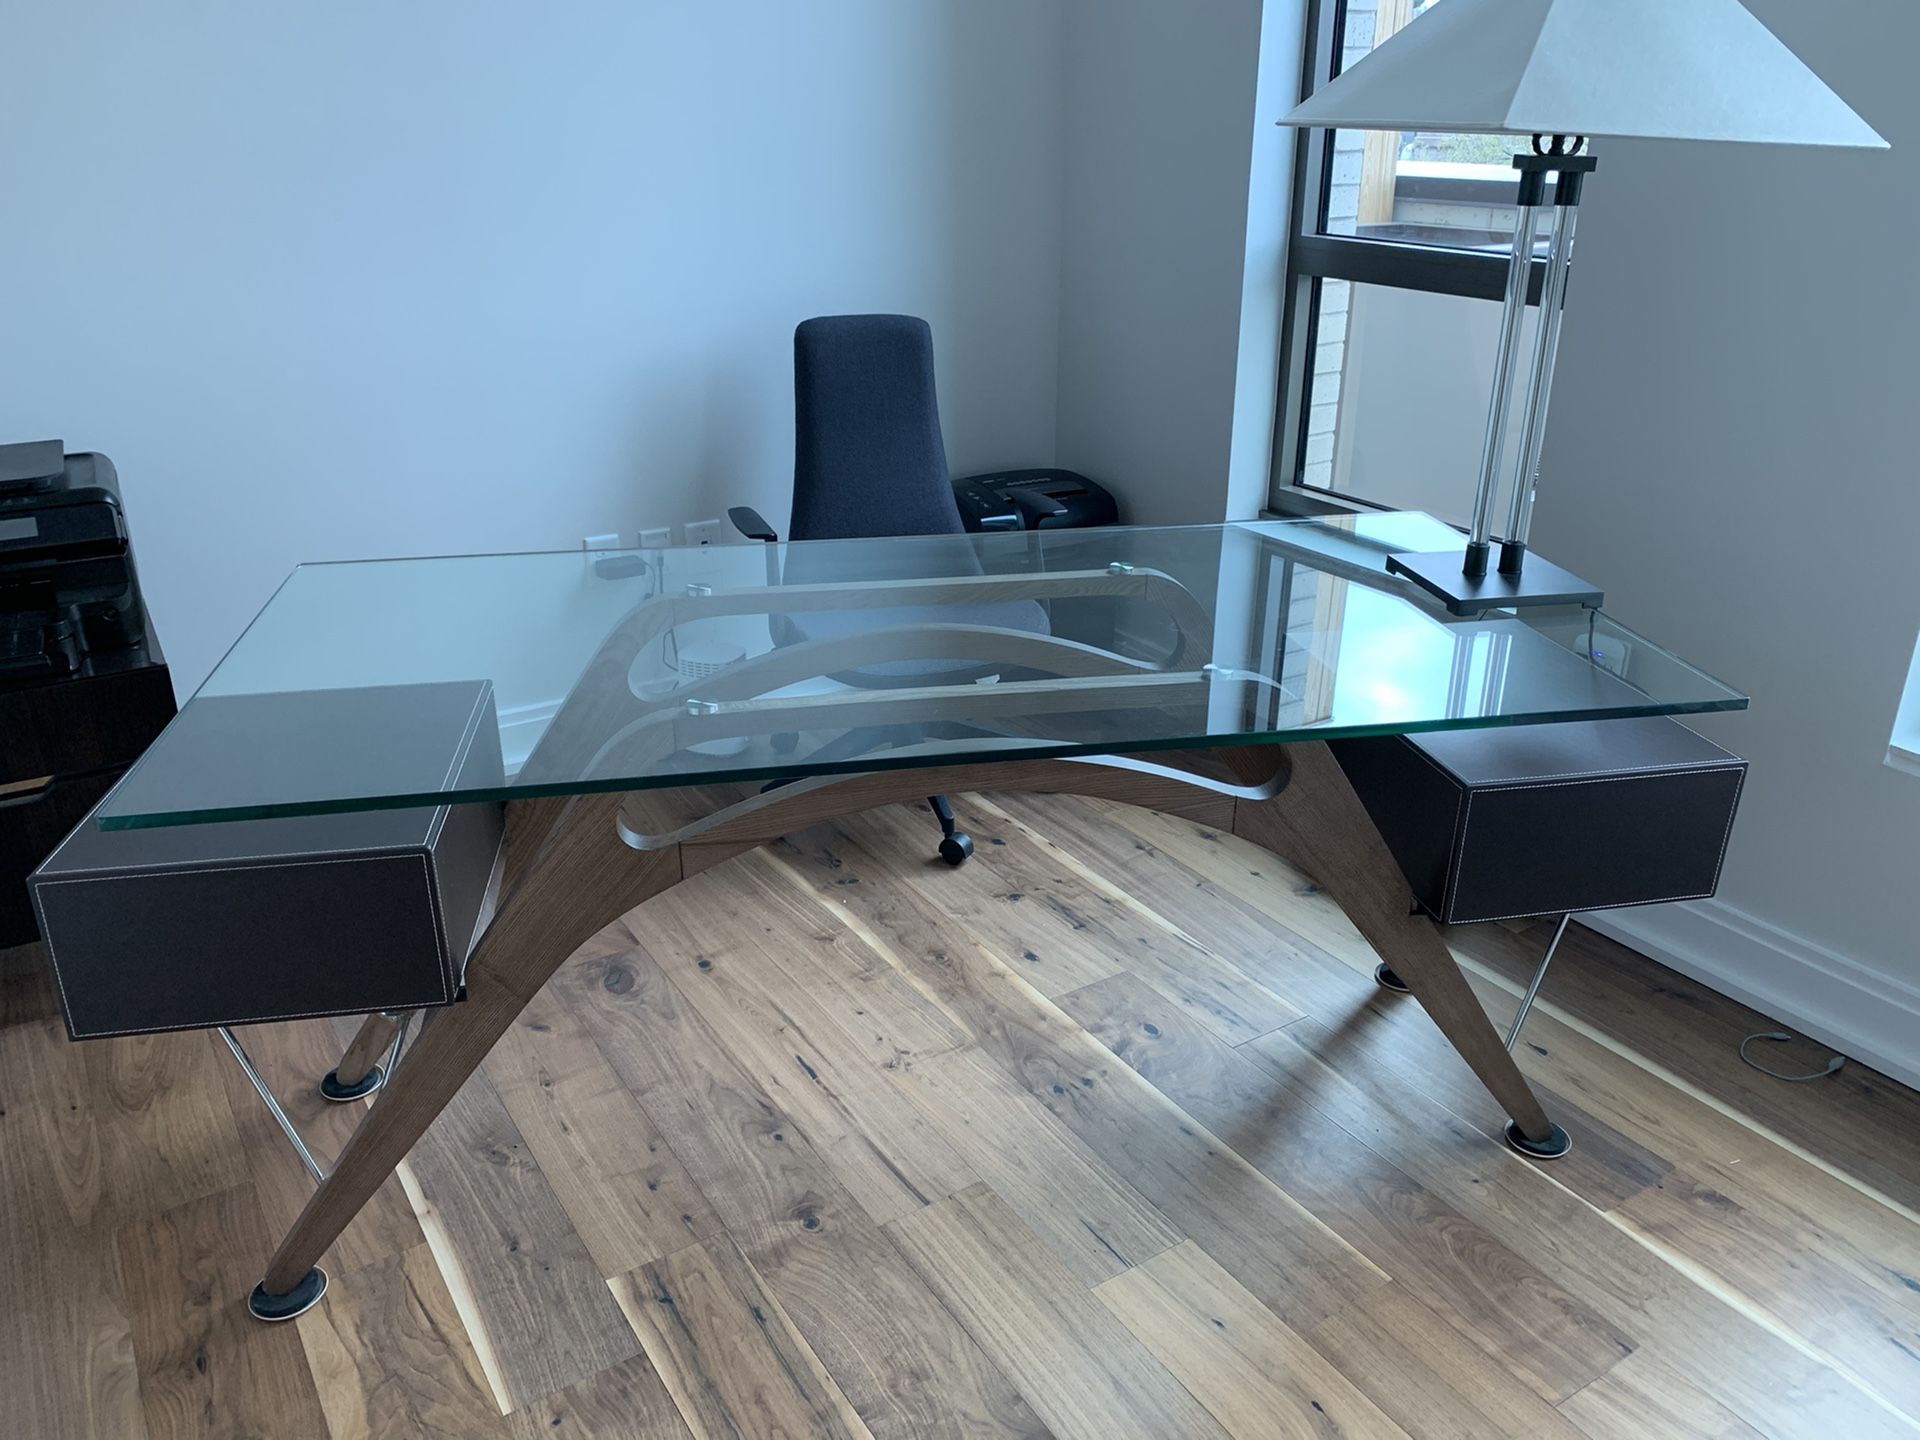 Office desk - made in Italy